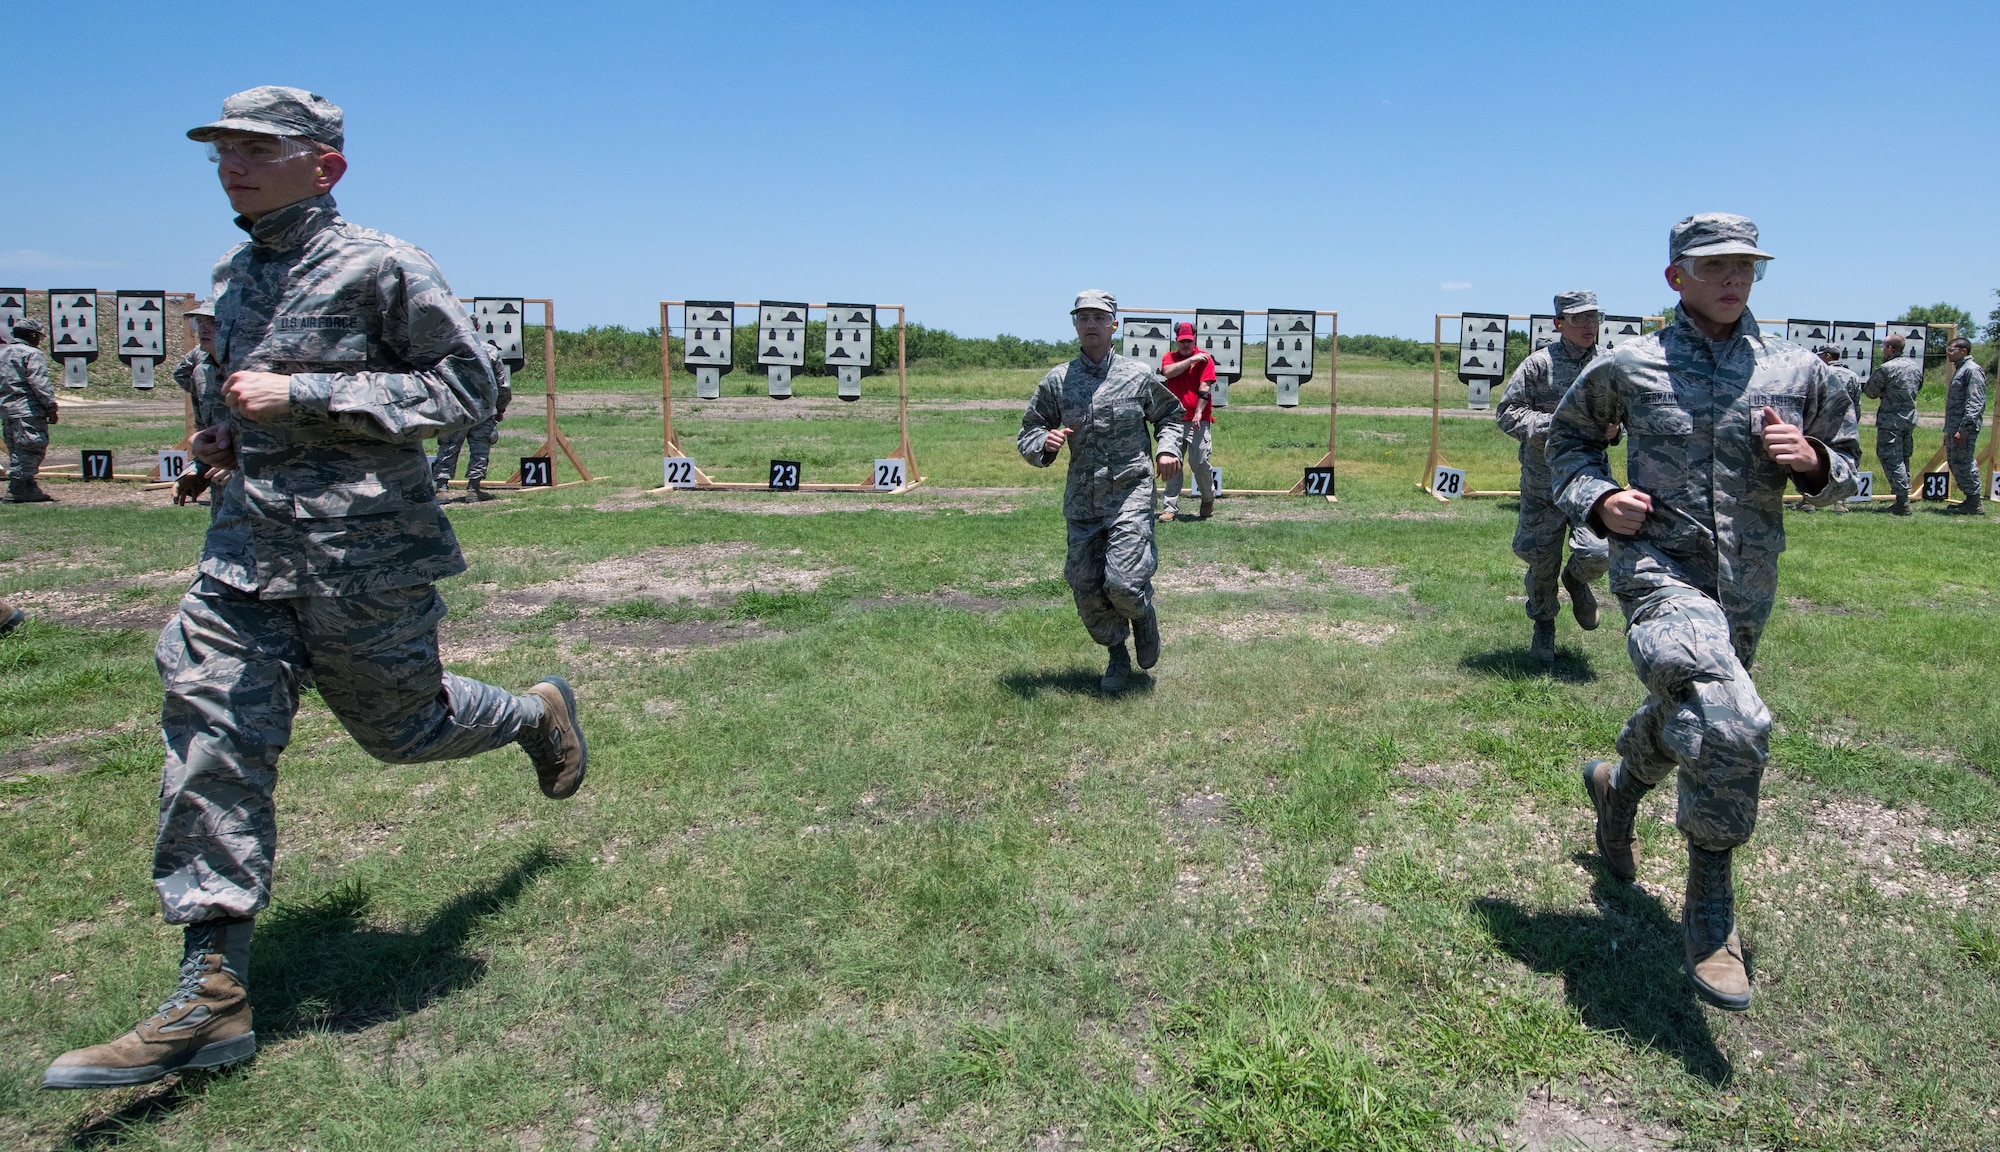 Air Force Basic Military Training trainees run back to their firing position after seeing their targets during a weapons familiarization course June 8 at Joint Base San Antonio-Medina Annex. The firing range allows instructors to train 244 BMT trainees daily, four days a week, qualifying more than 40,000 BMT trainees in the M-4 carbine annually.